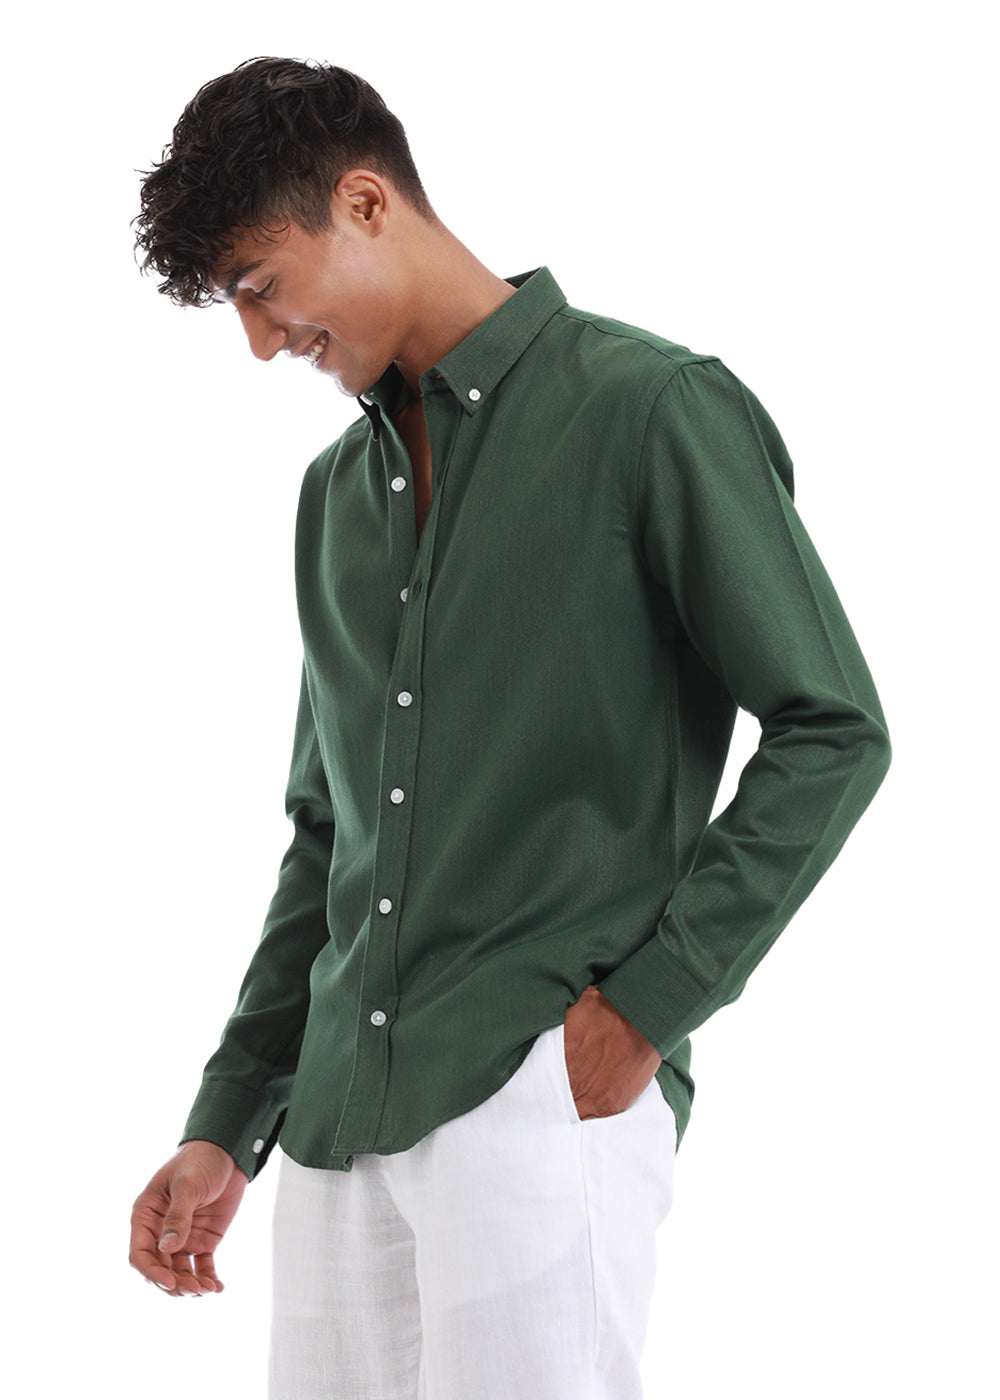 Cilantro Green Blended Linen shirt Side view